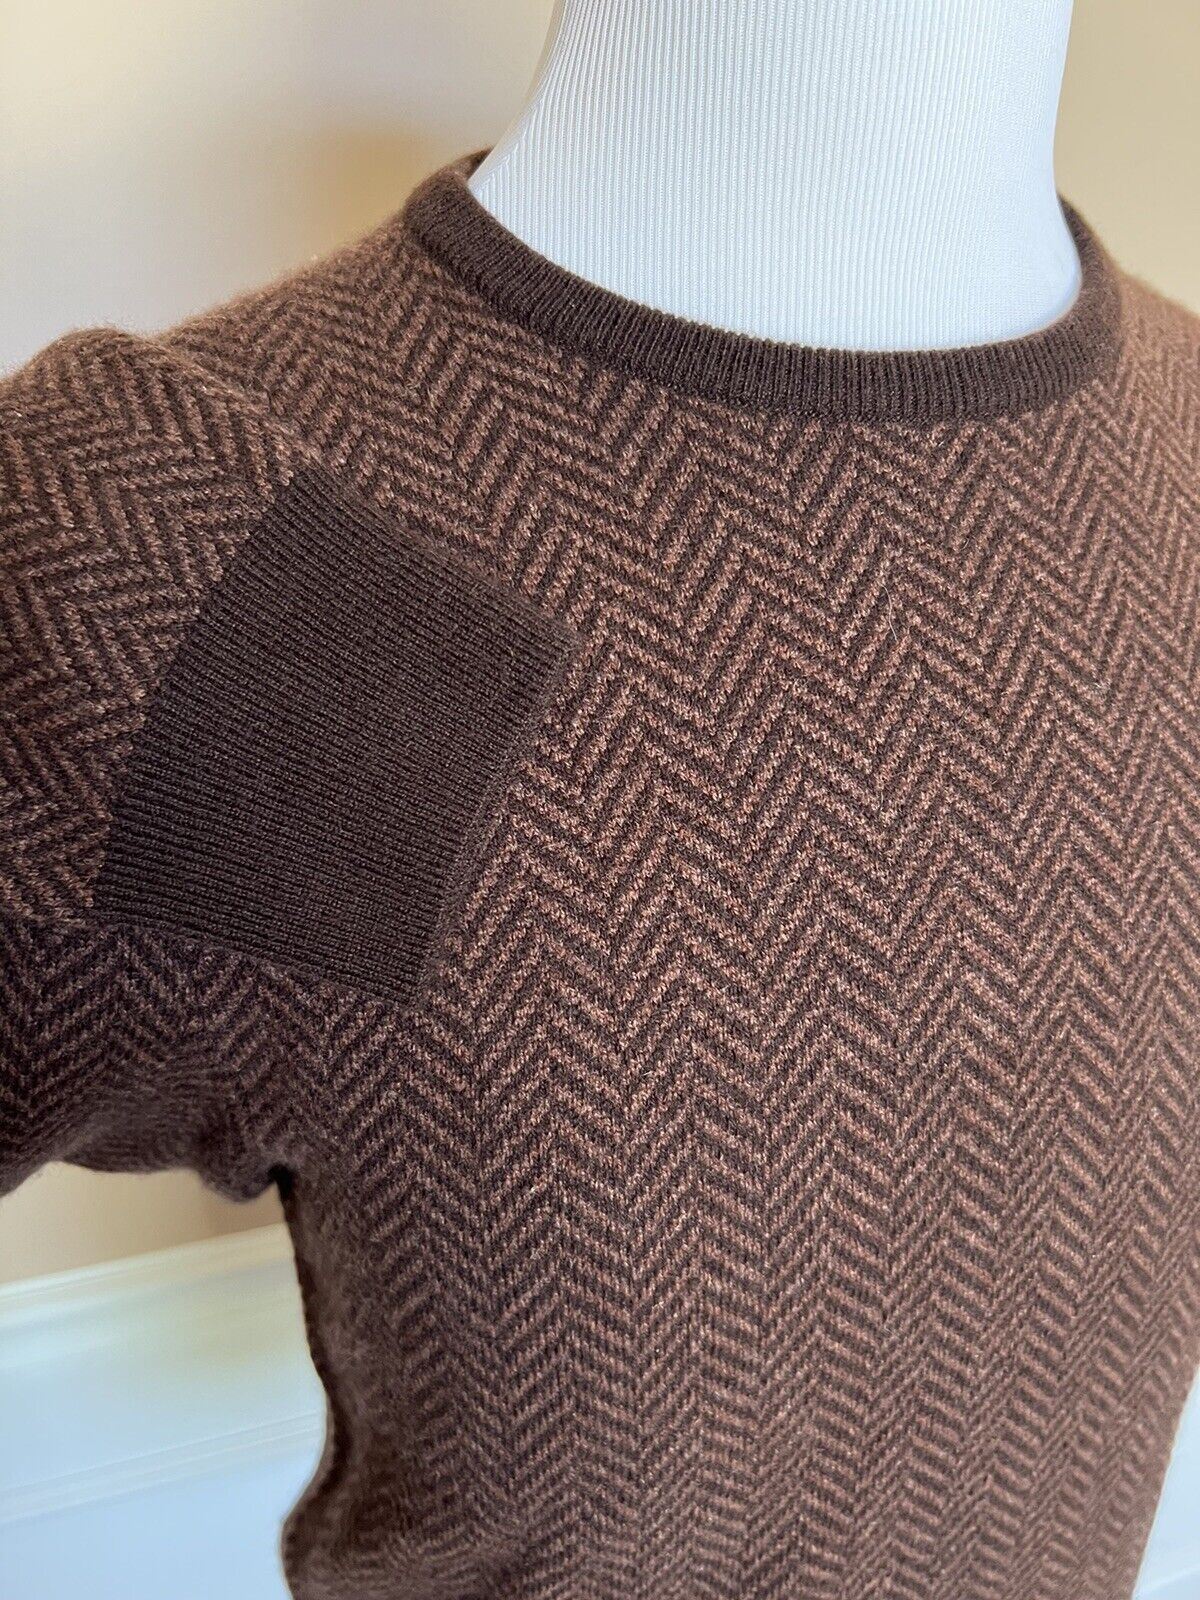 NWT $1495 Ralph Lauren Purple Label Cashmere Brown Sweater XL Made in Italy